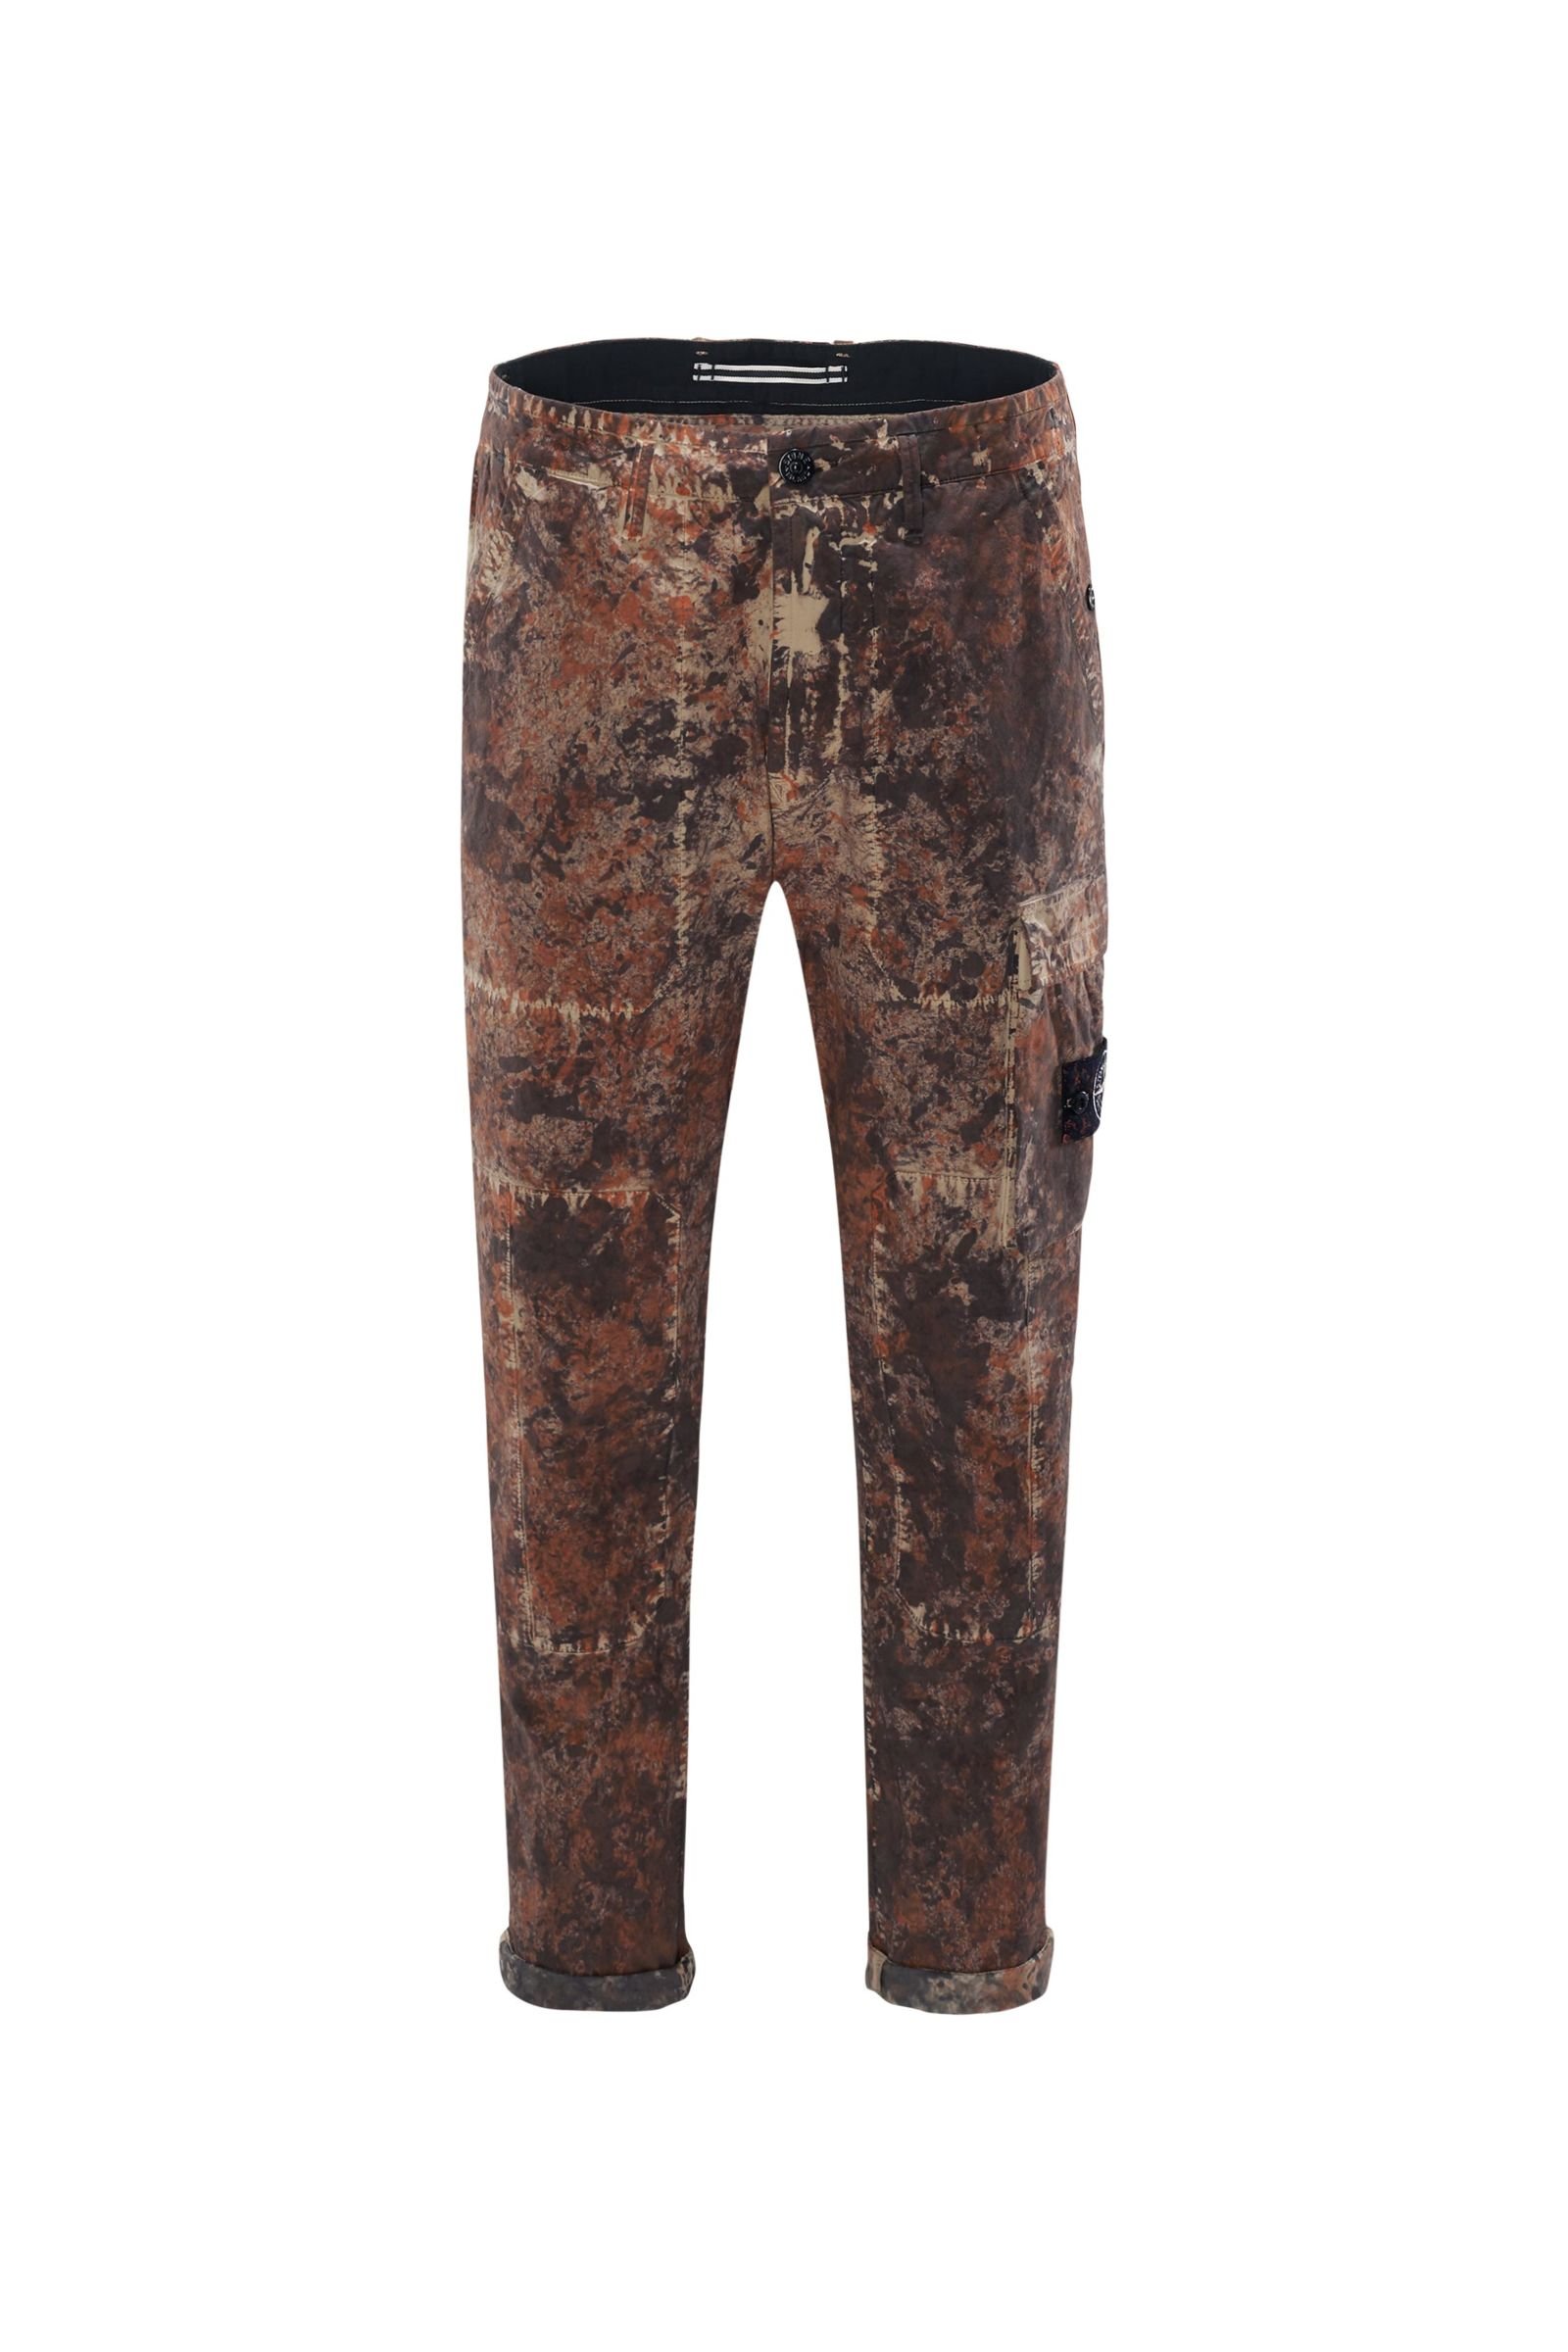 Cargo trousers 'Paintball Camo' rust brown patterned